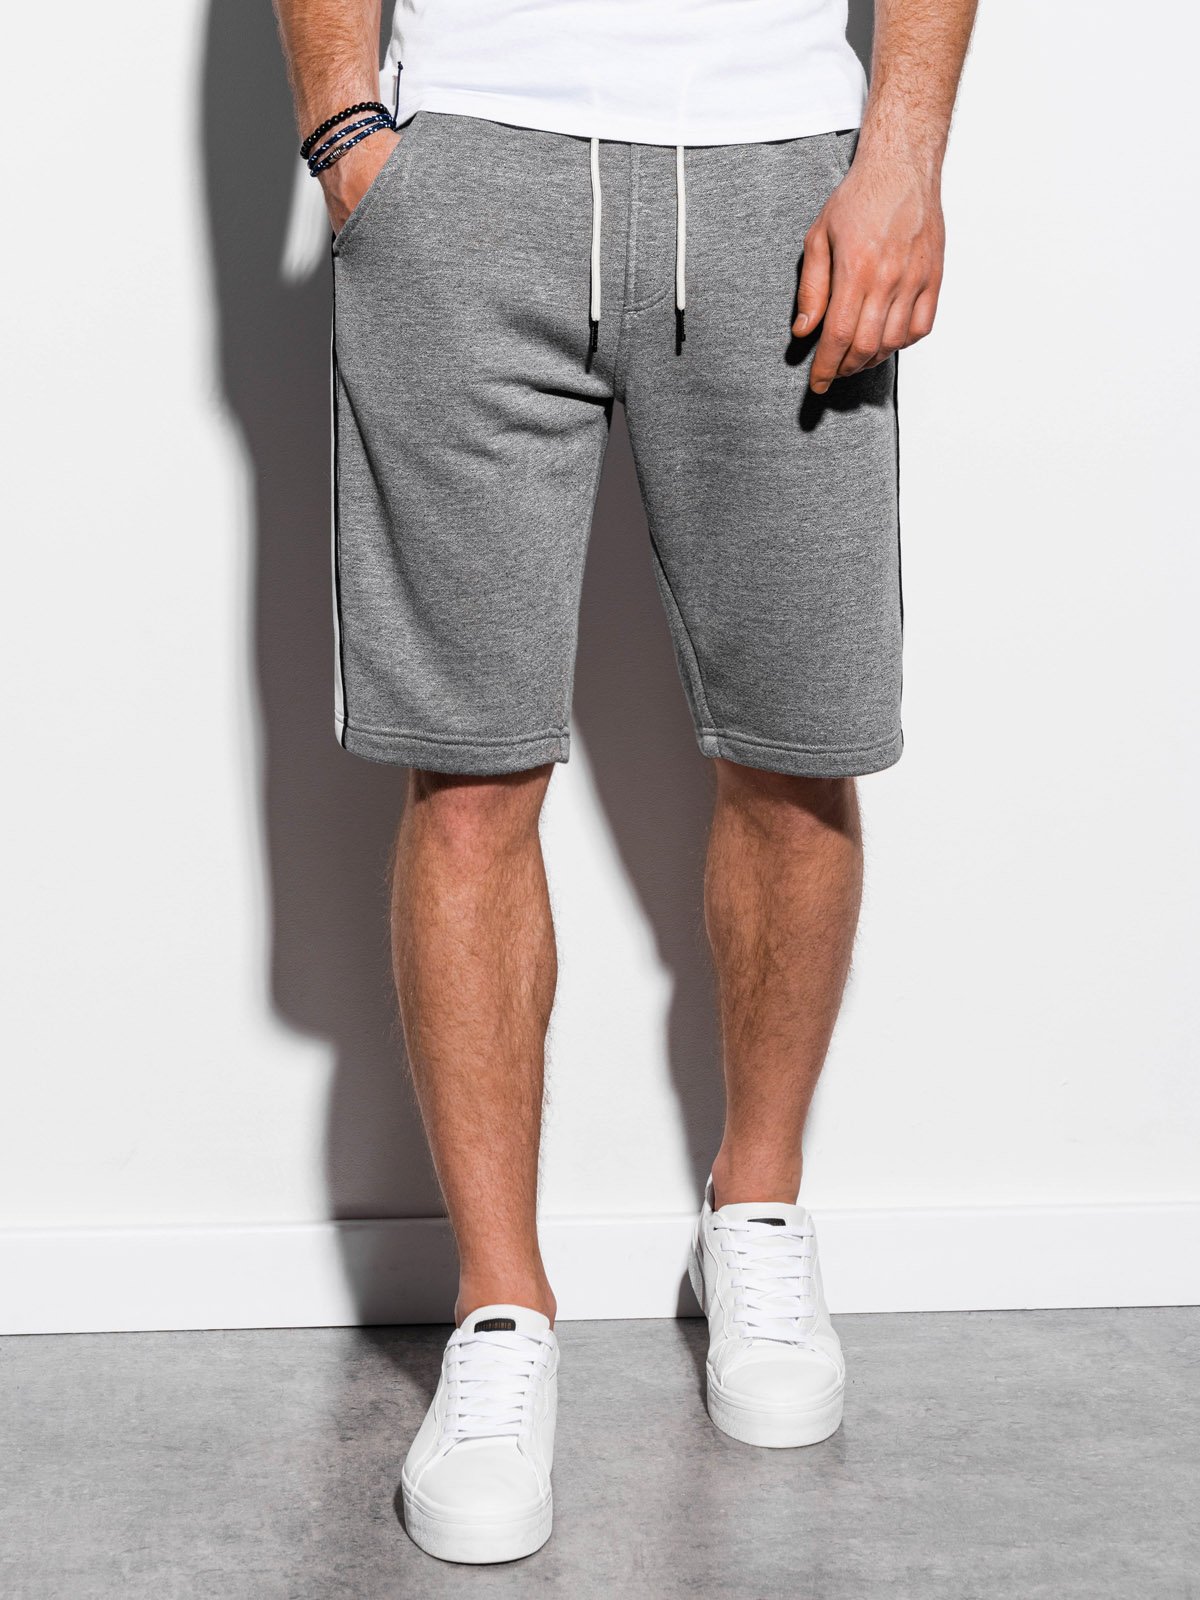 Men's sweat shorts, when it comesptions available, it can be challenging to know how to choose the right pair of shorts for your needs.